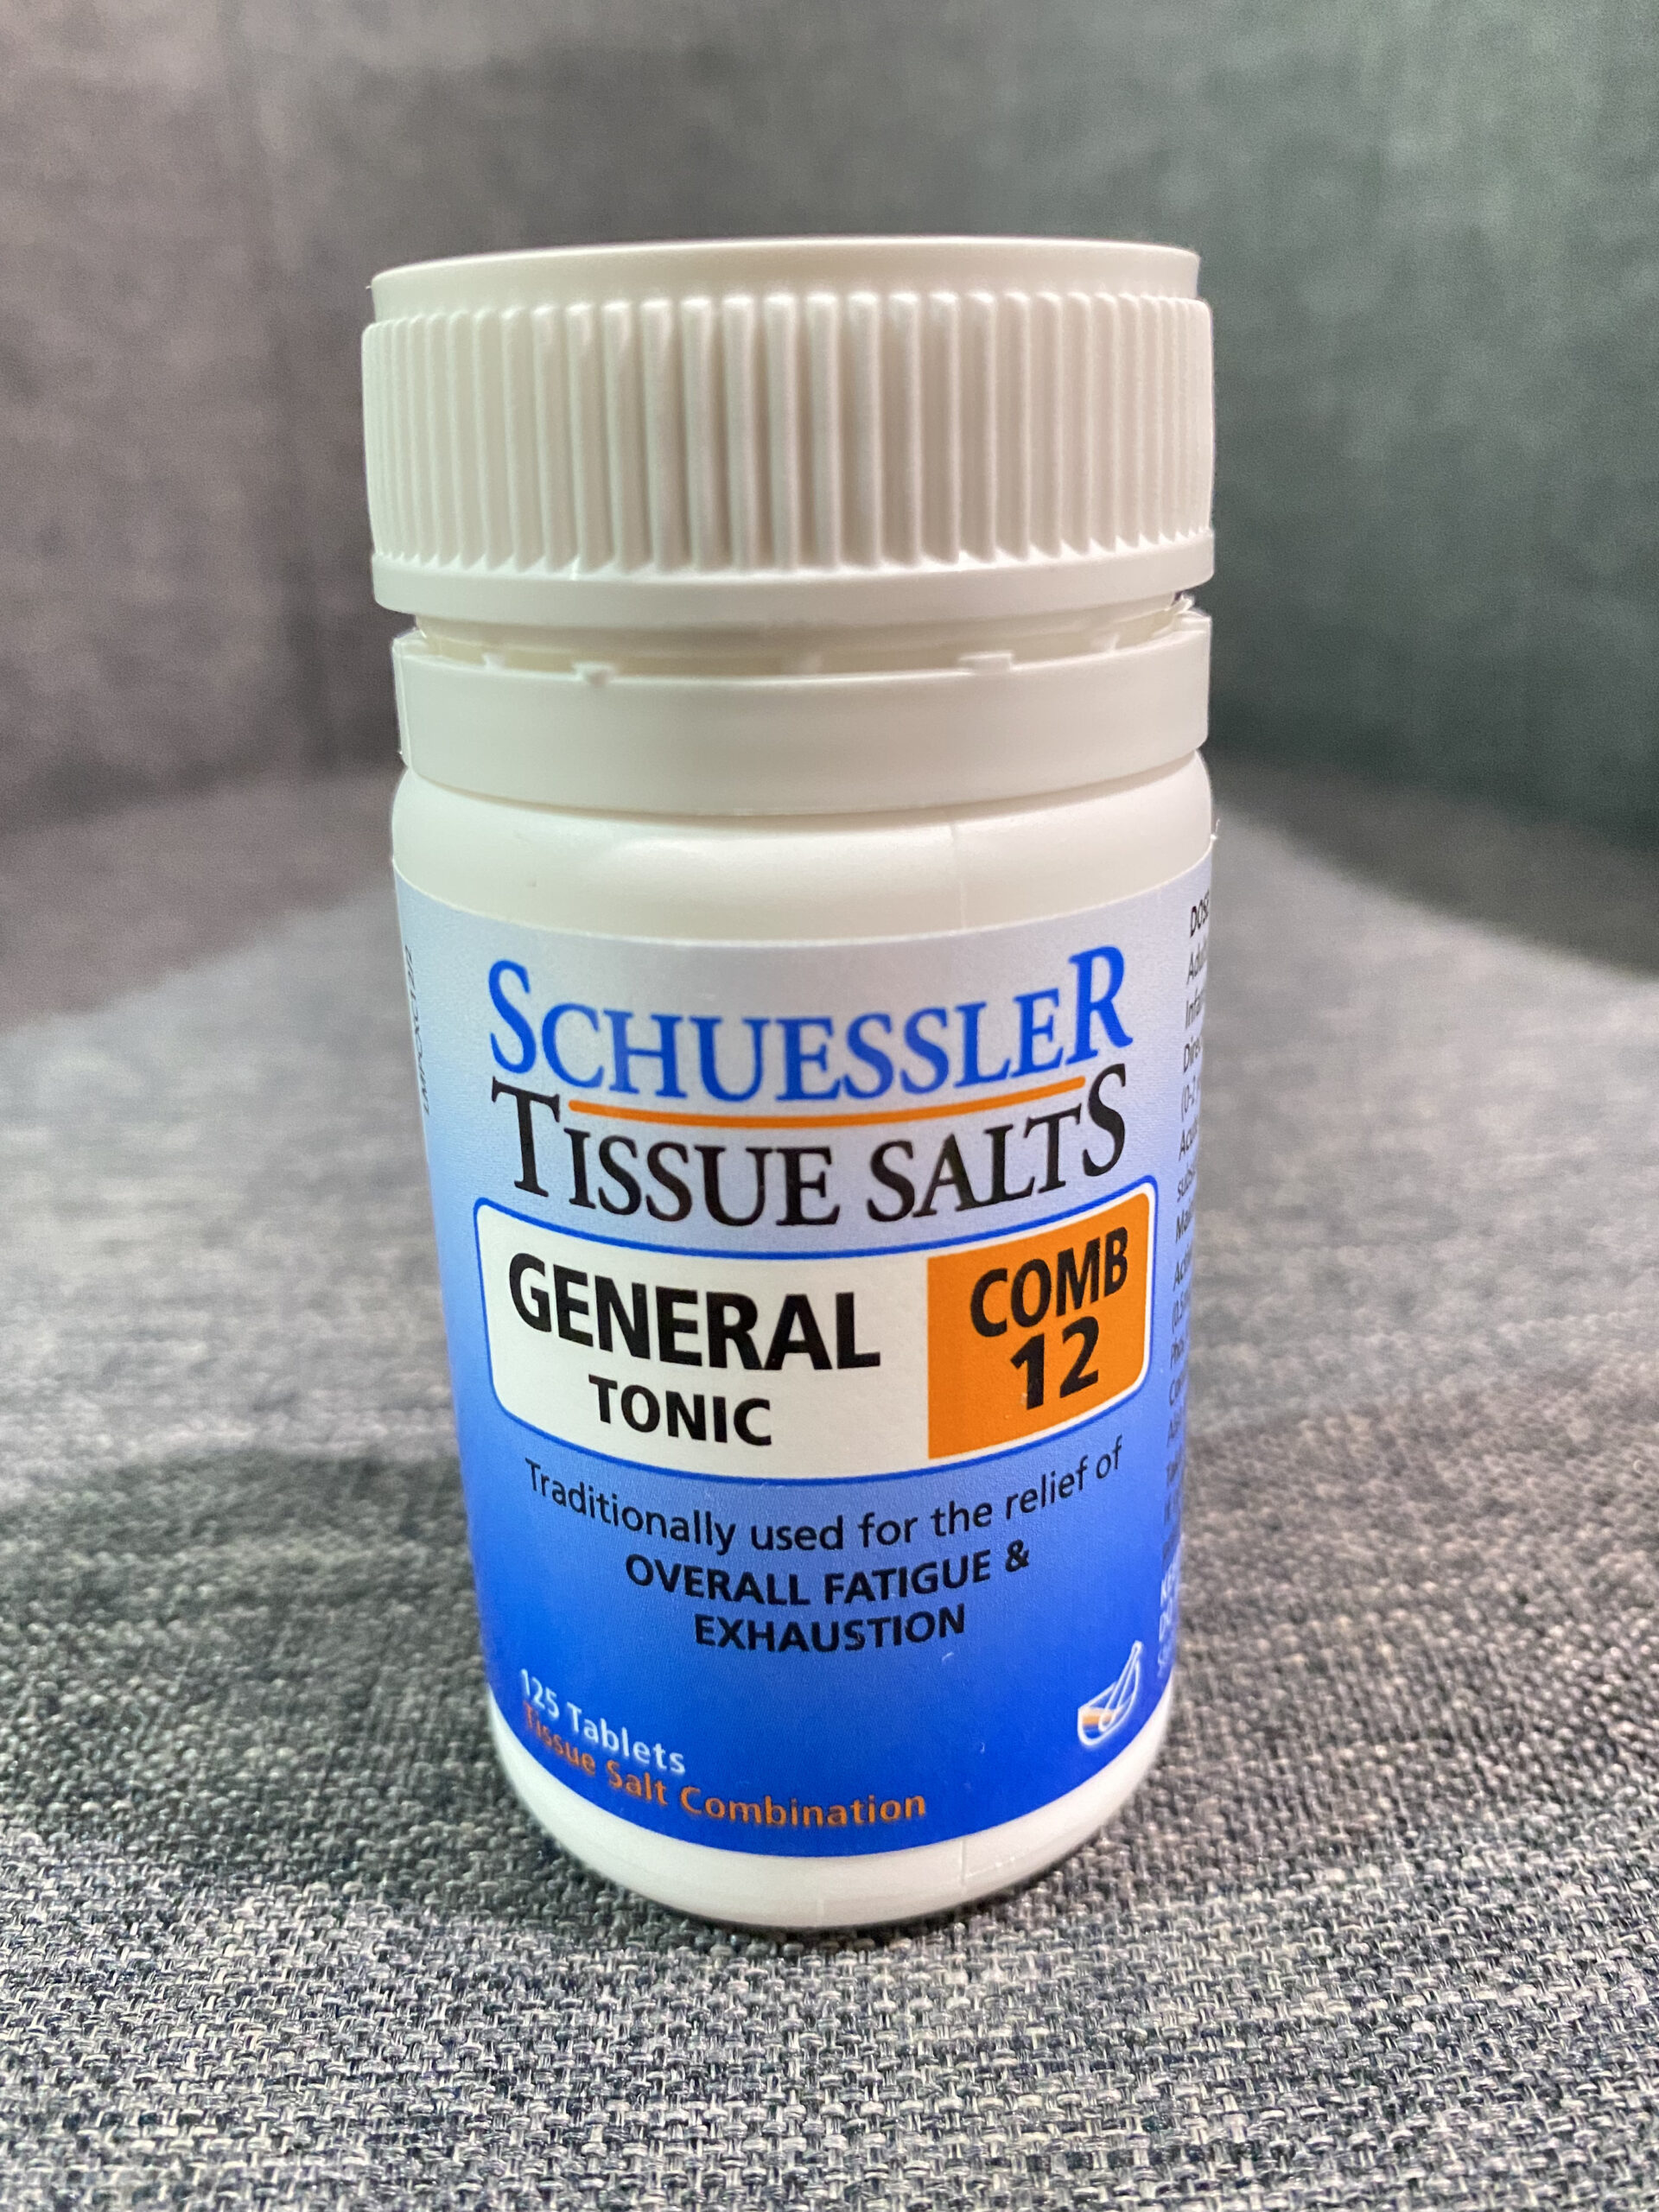 Schuessler Tissue Salts. Reduces Fatigue. Helps Overcome Exhaustion.